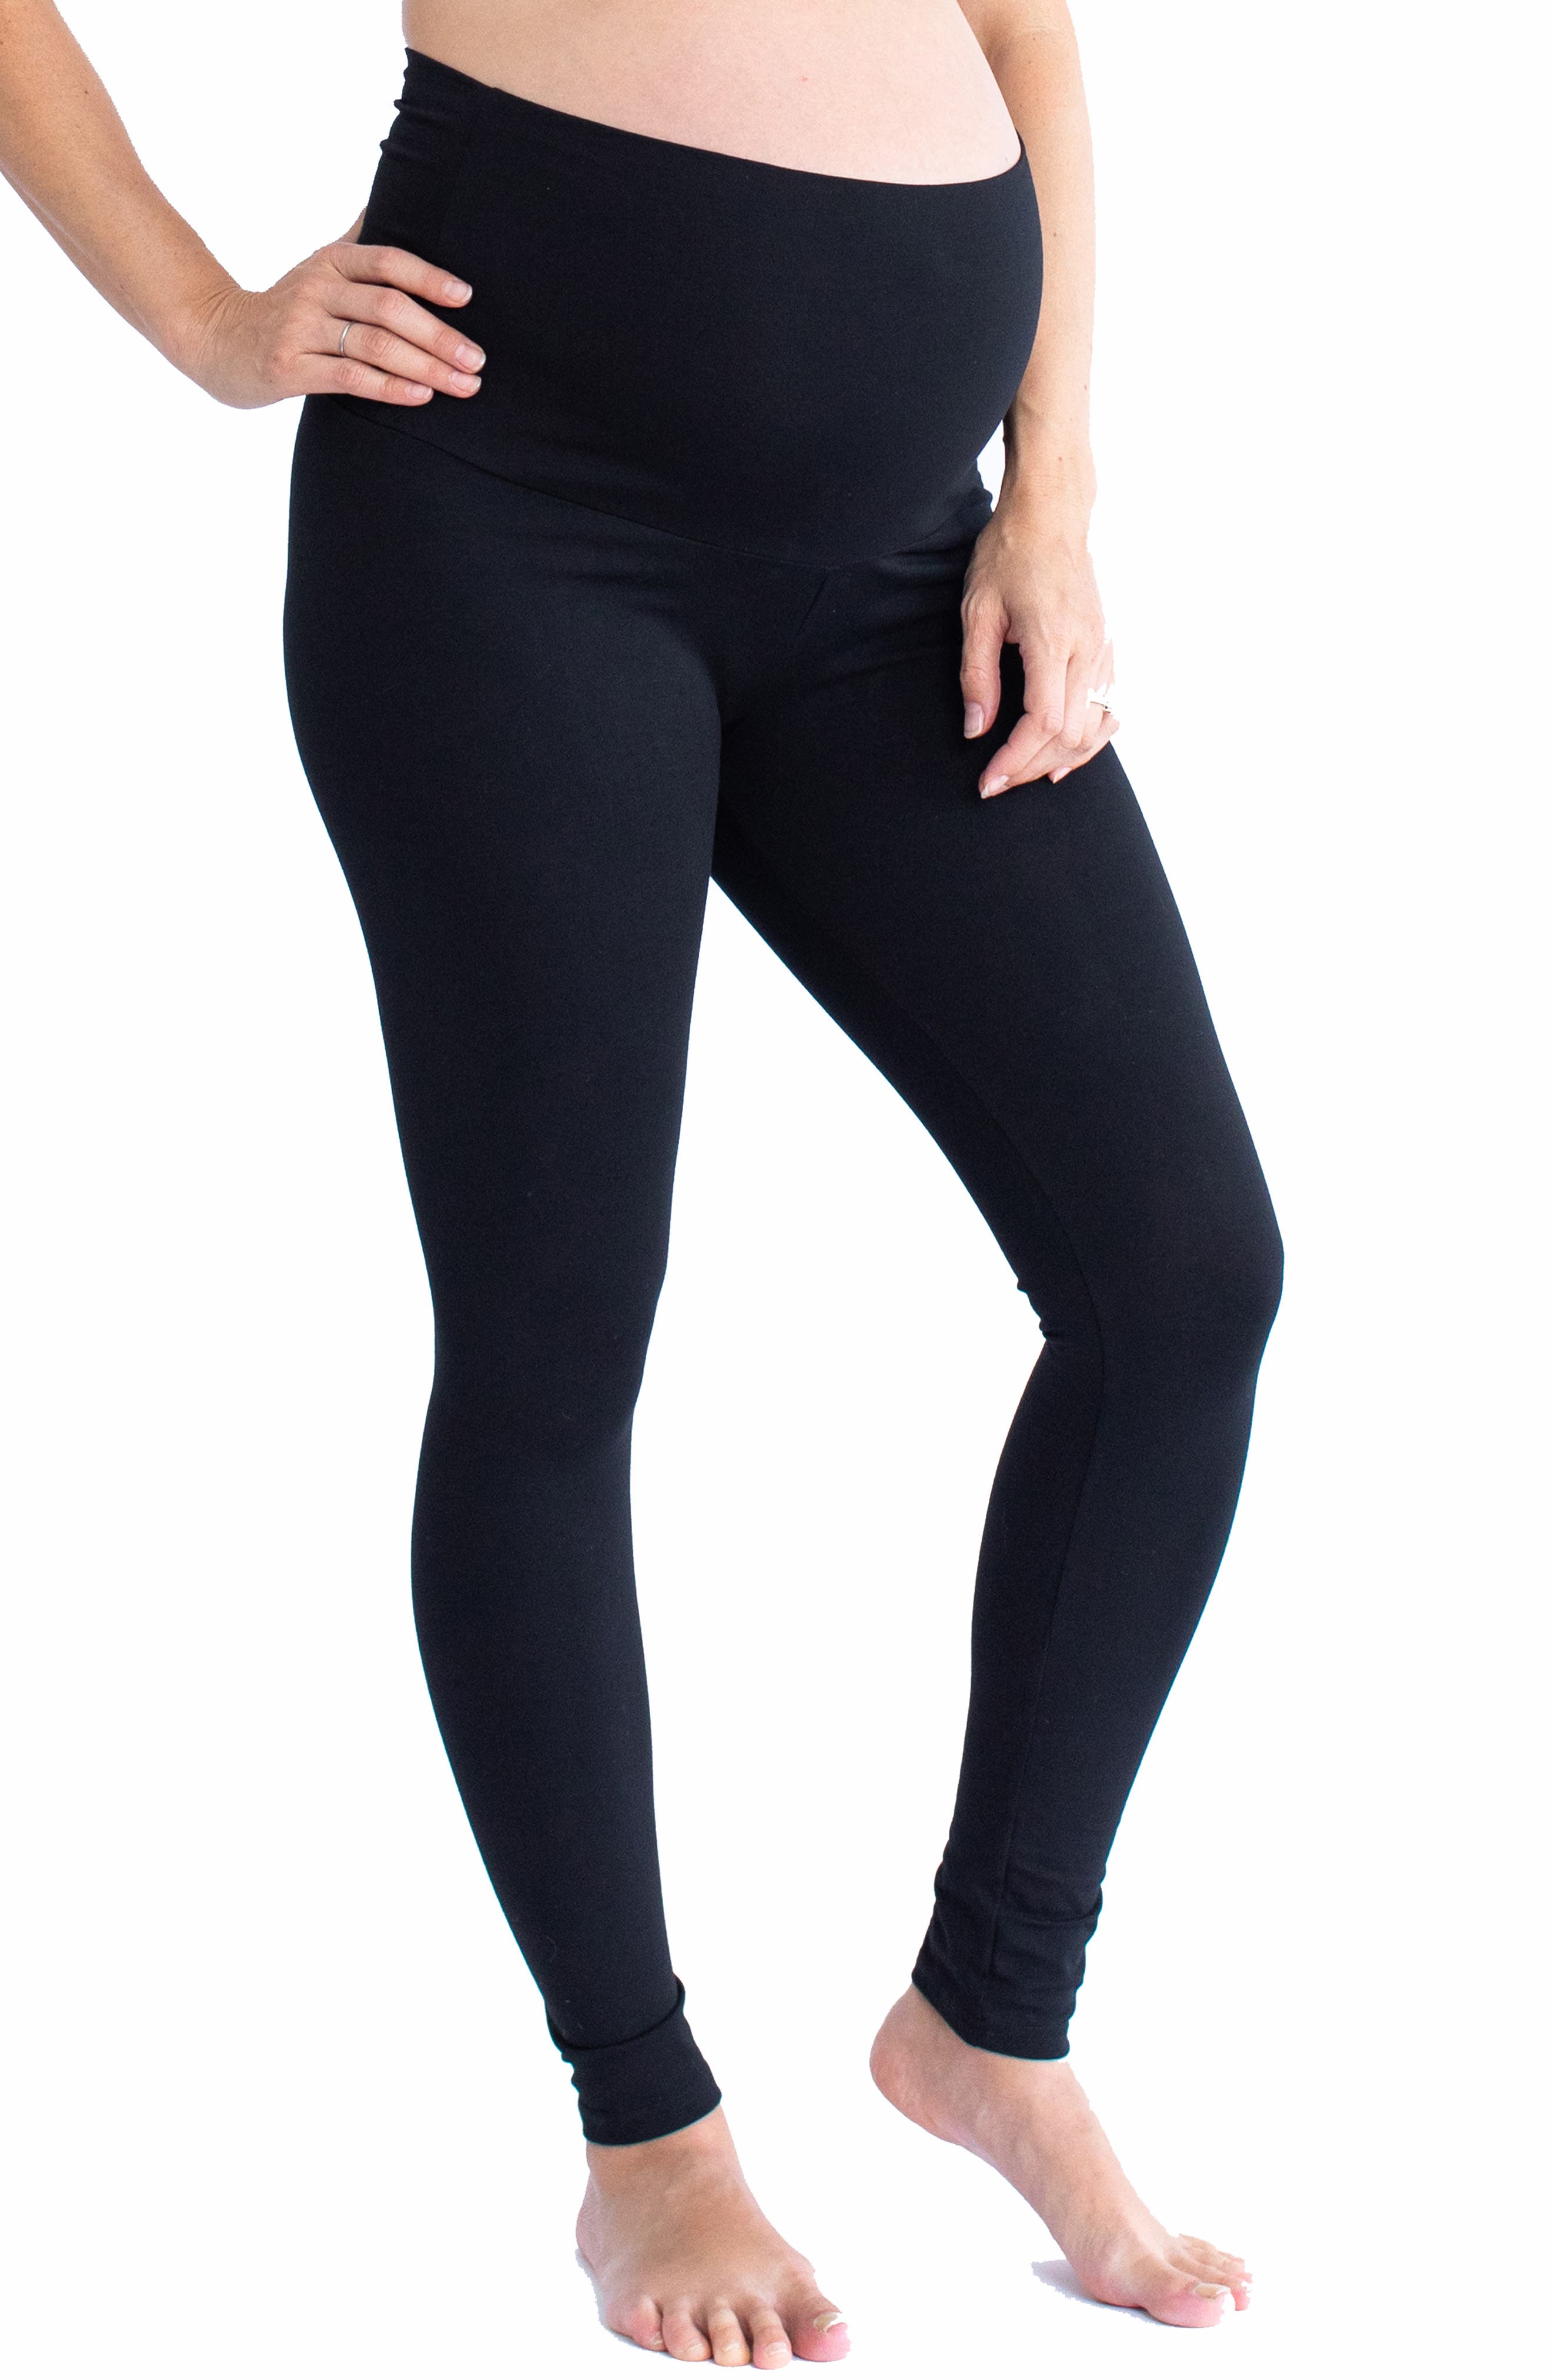 Winter Thick Heavy Warm MATERNITY Cotton Front Panel Full Ankle Length Leggings 